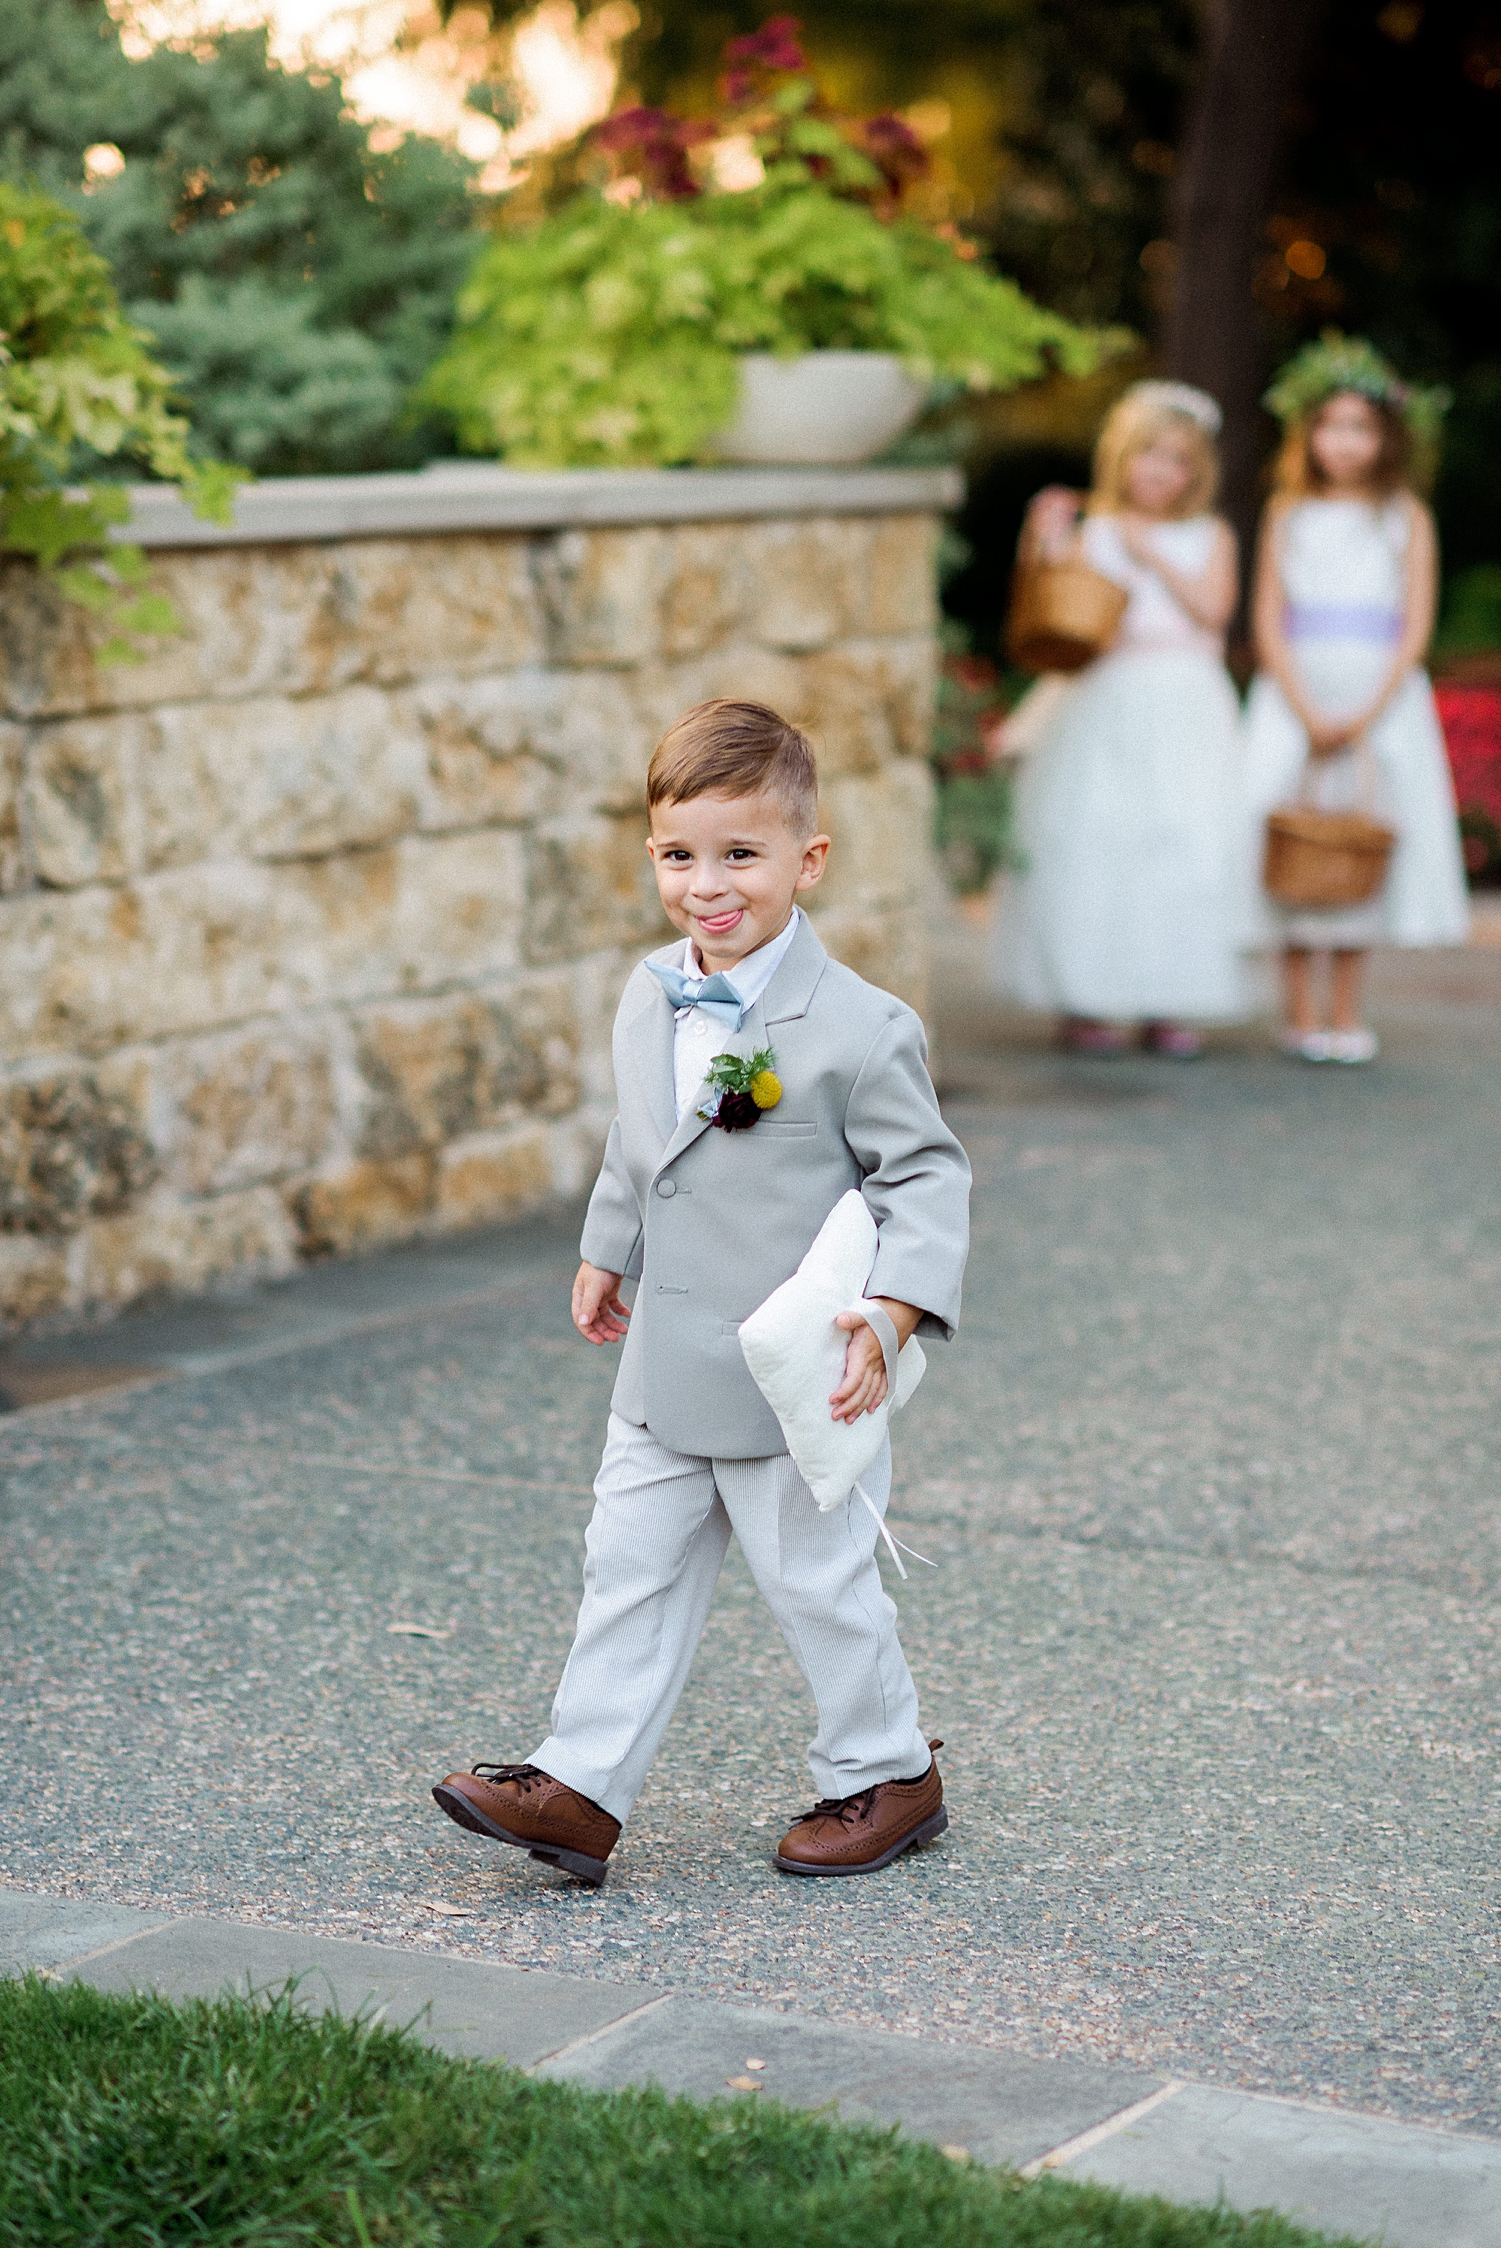 wedding ring bearer ceremony processional 